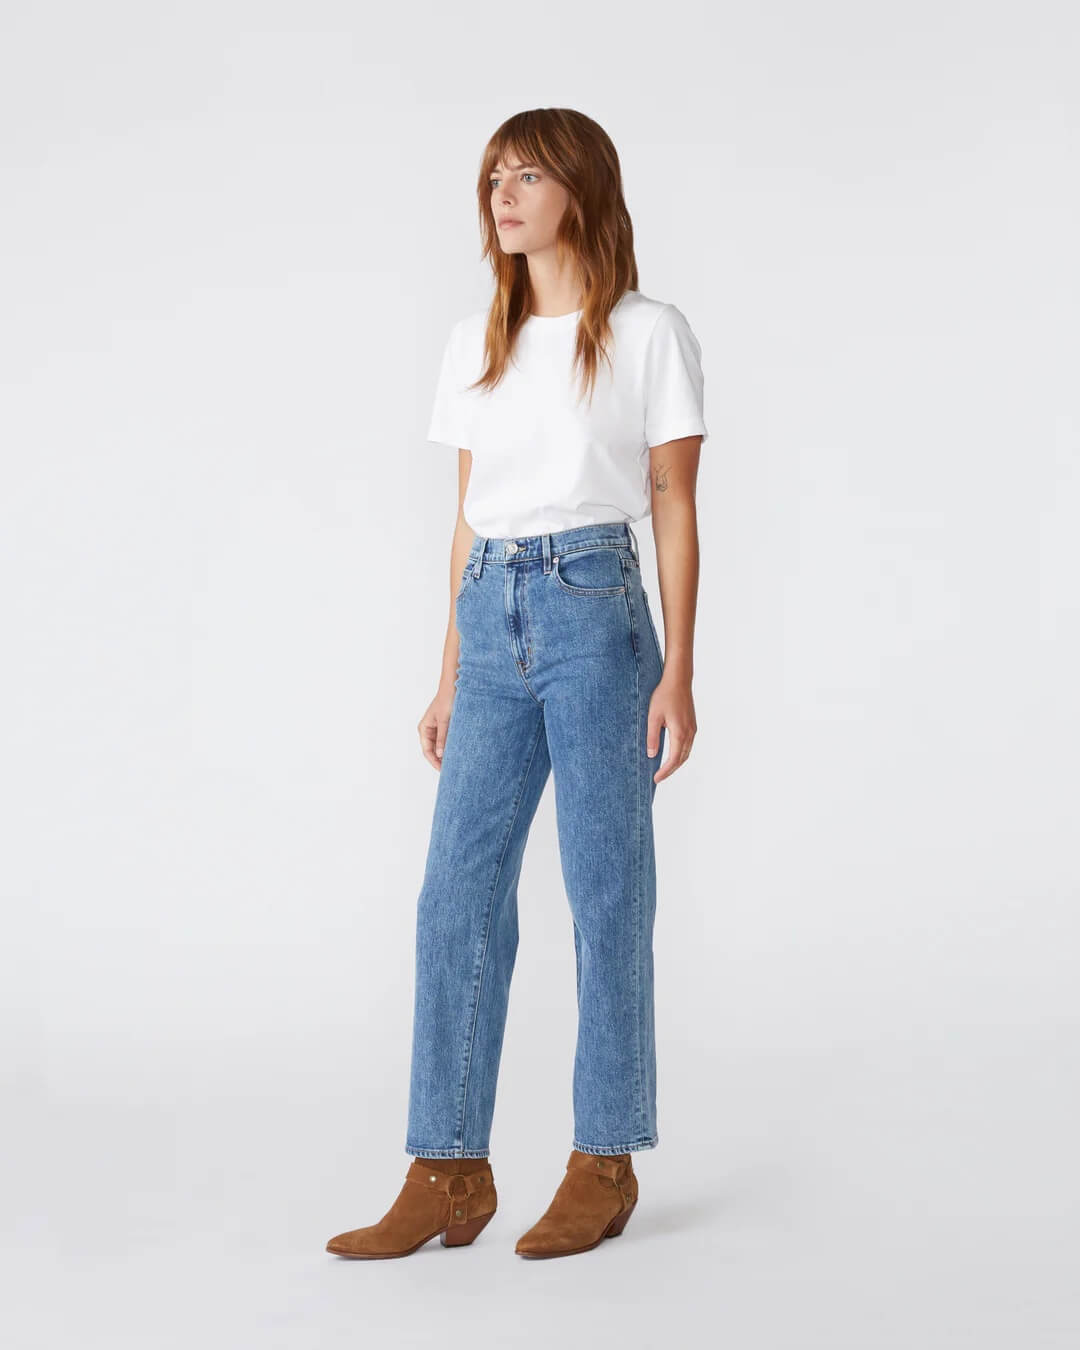 SLVRLAKE London Crop Jeans in Forever Blue from The New Trend